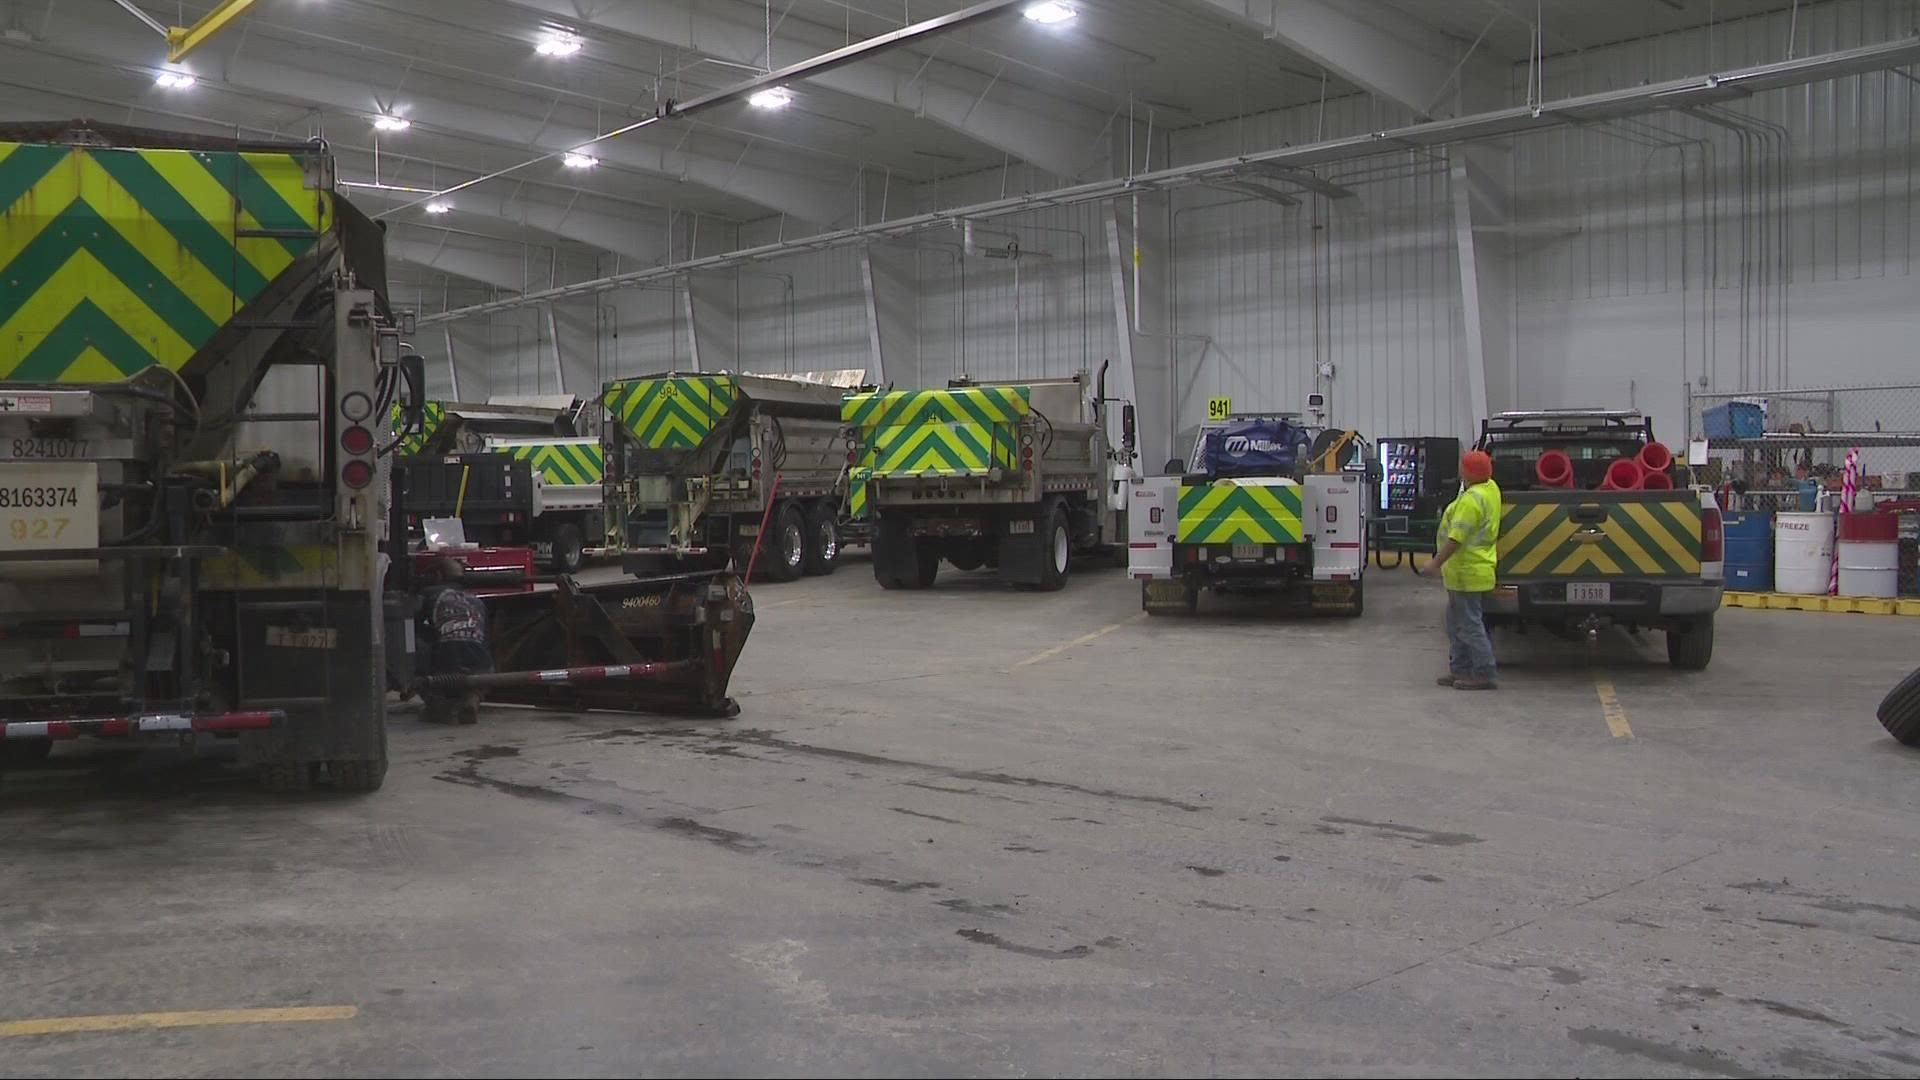 Northeast Ohio ODOT officials say they are equipped with more than 260,000 tons of salt and more than 300 plow drivers.